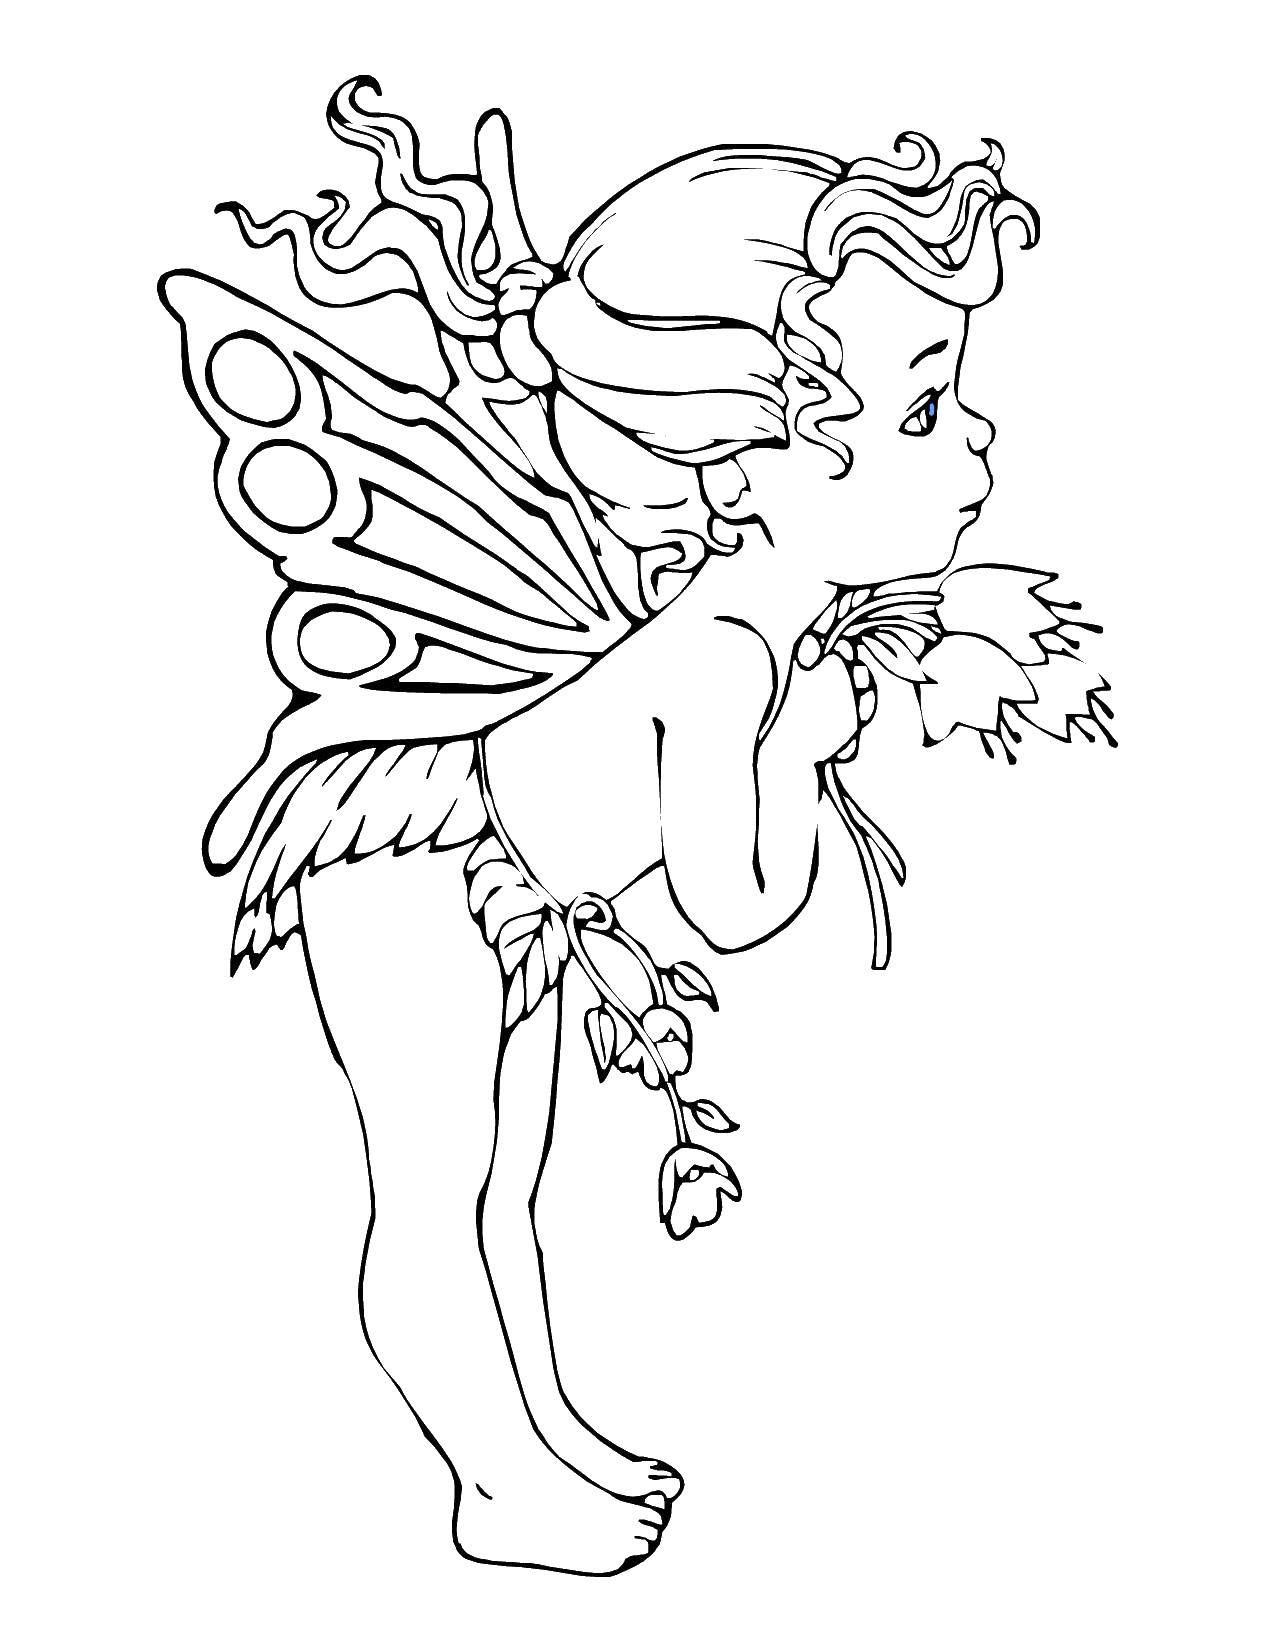 Coloring Fairy girl with flowers. Category children. Tags:  children, girl, flowers.